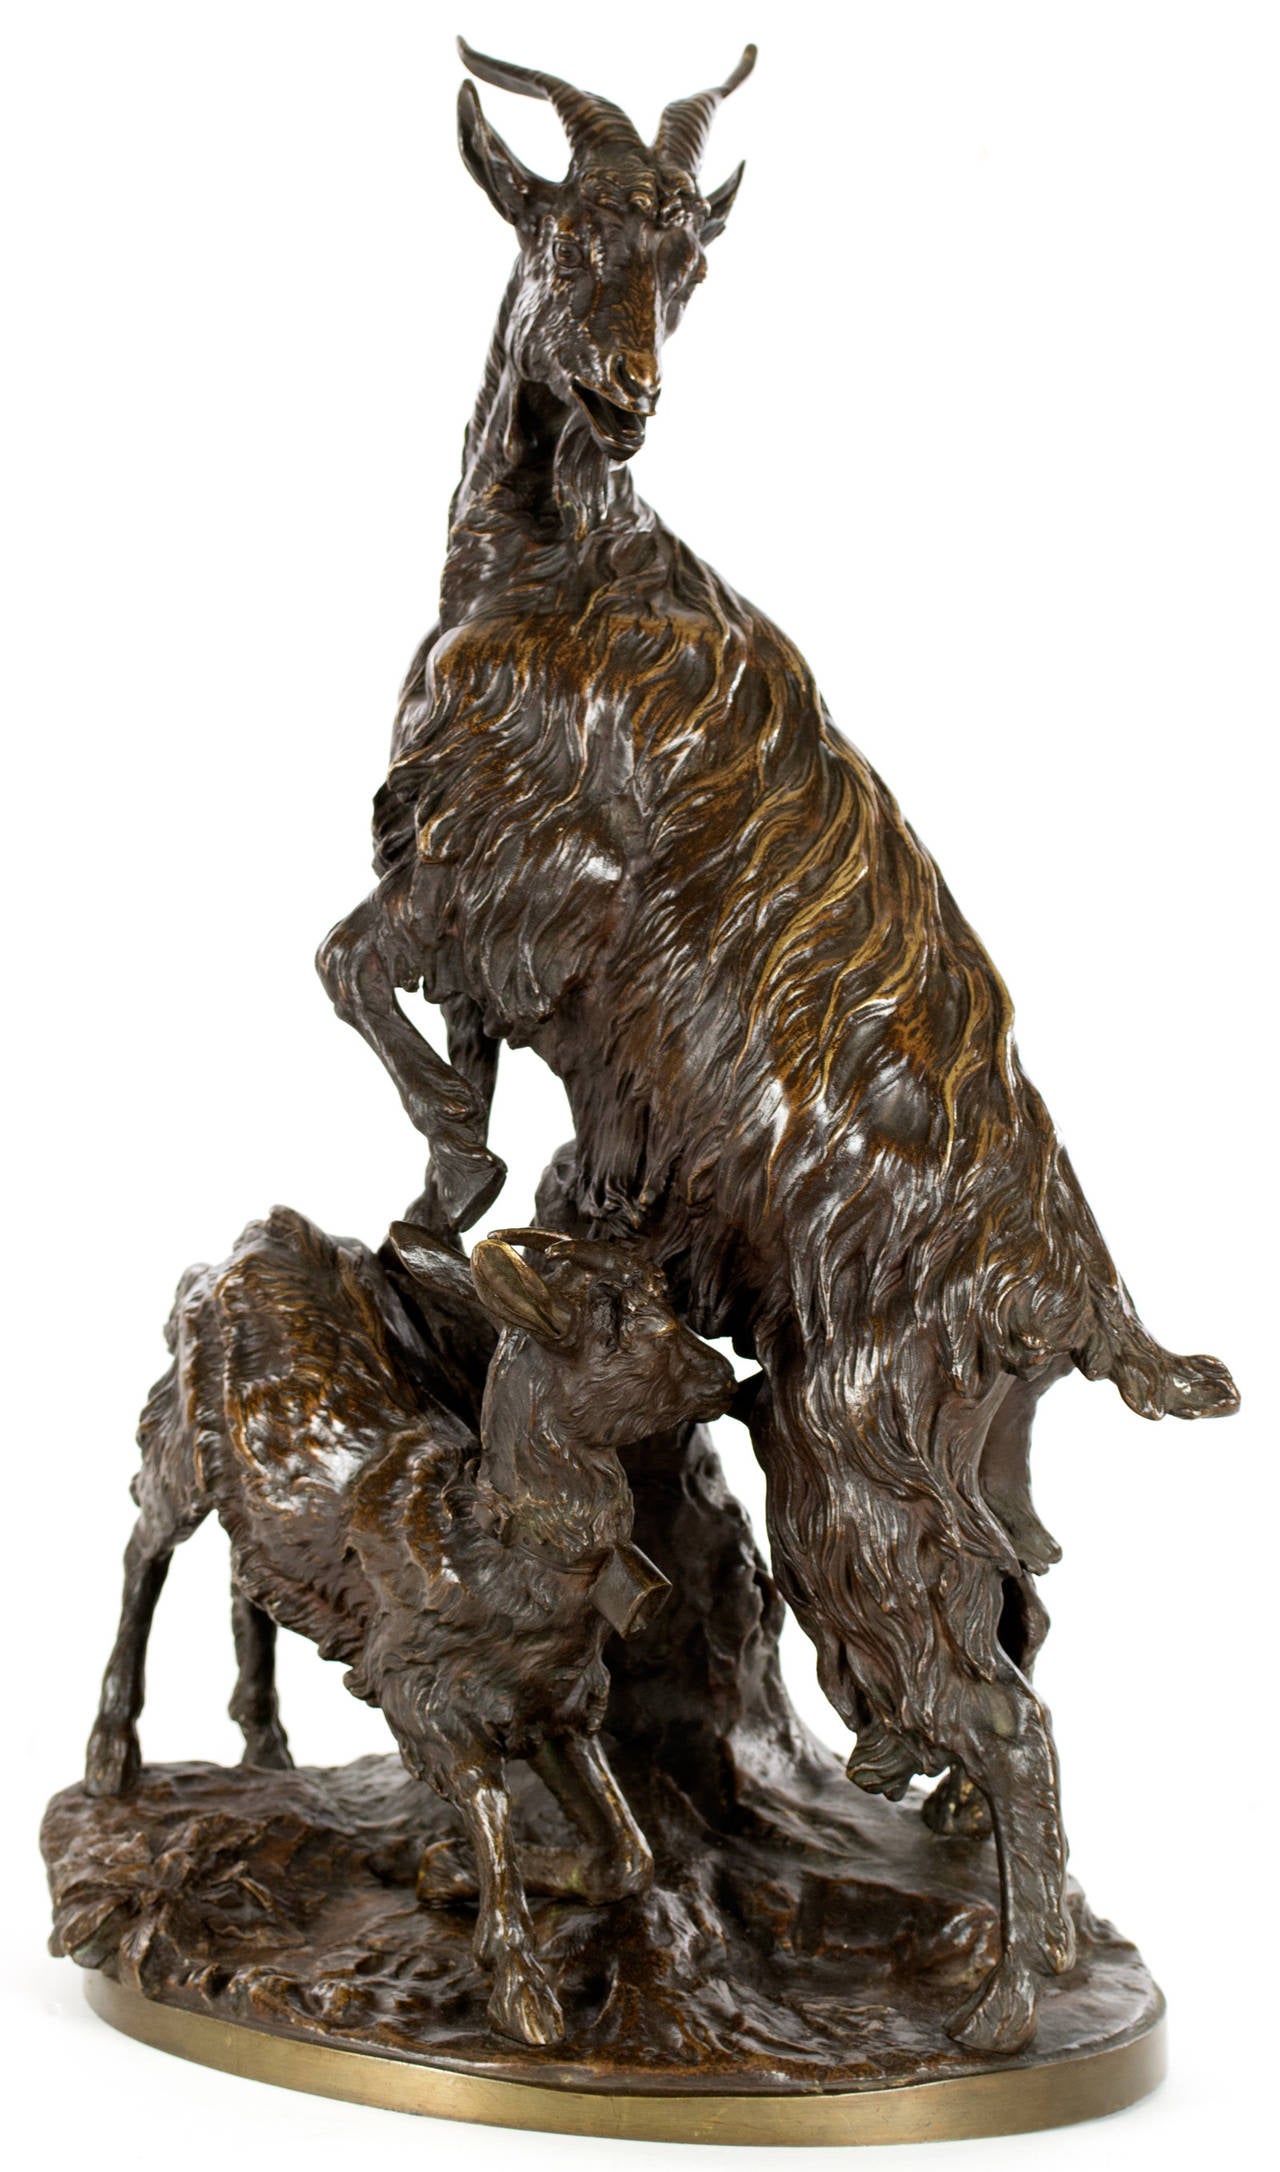 A bronze animalier sculpture of a goat and kid by Emile Pinedo (French, 1840 - 1916) and stamped Tiffany & Co. Pinedo was both sculpted and cast sculptures, often working in collaboration with other artists, including Alphonse Mucha. In the 1890s,